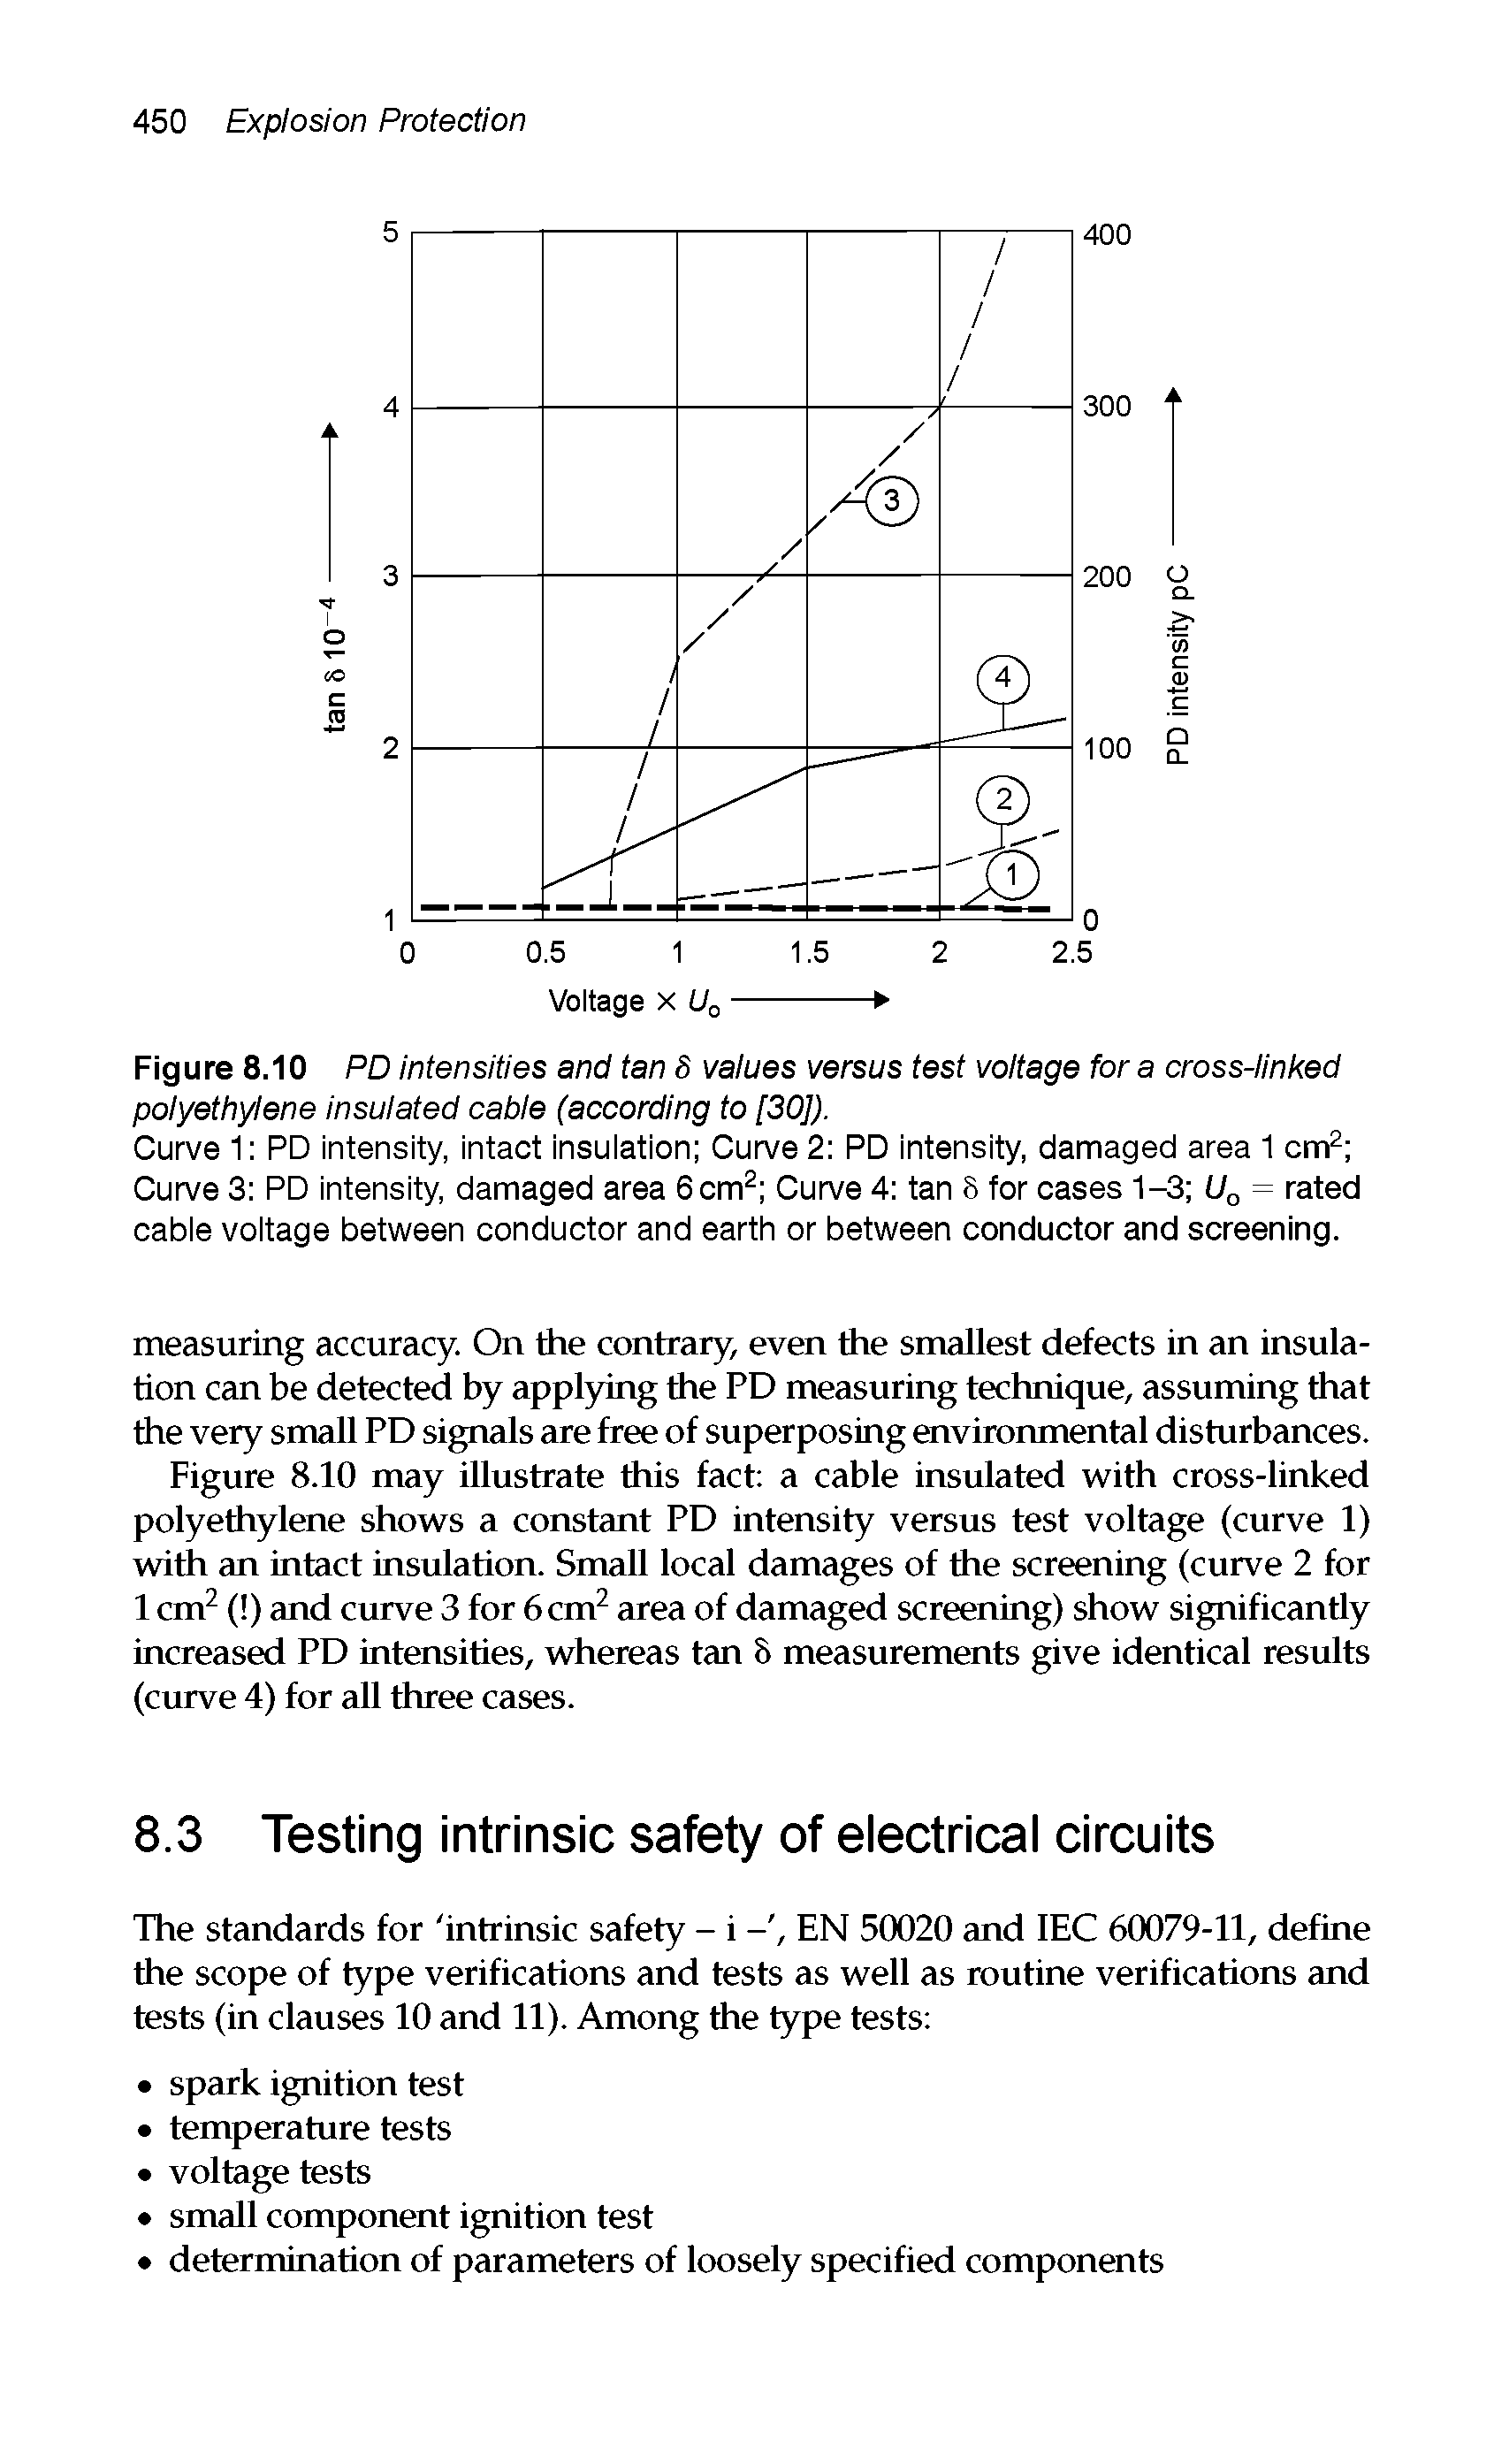 Figure 8.10 PD intensities and tan S values versus test voltage for a cross-linked polyethylene insulated cable (according to [30]).